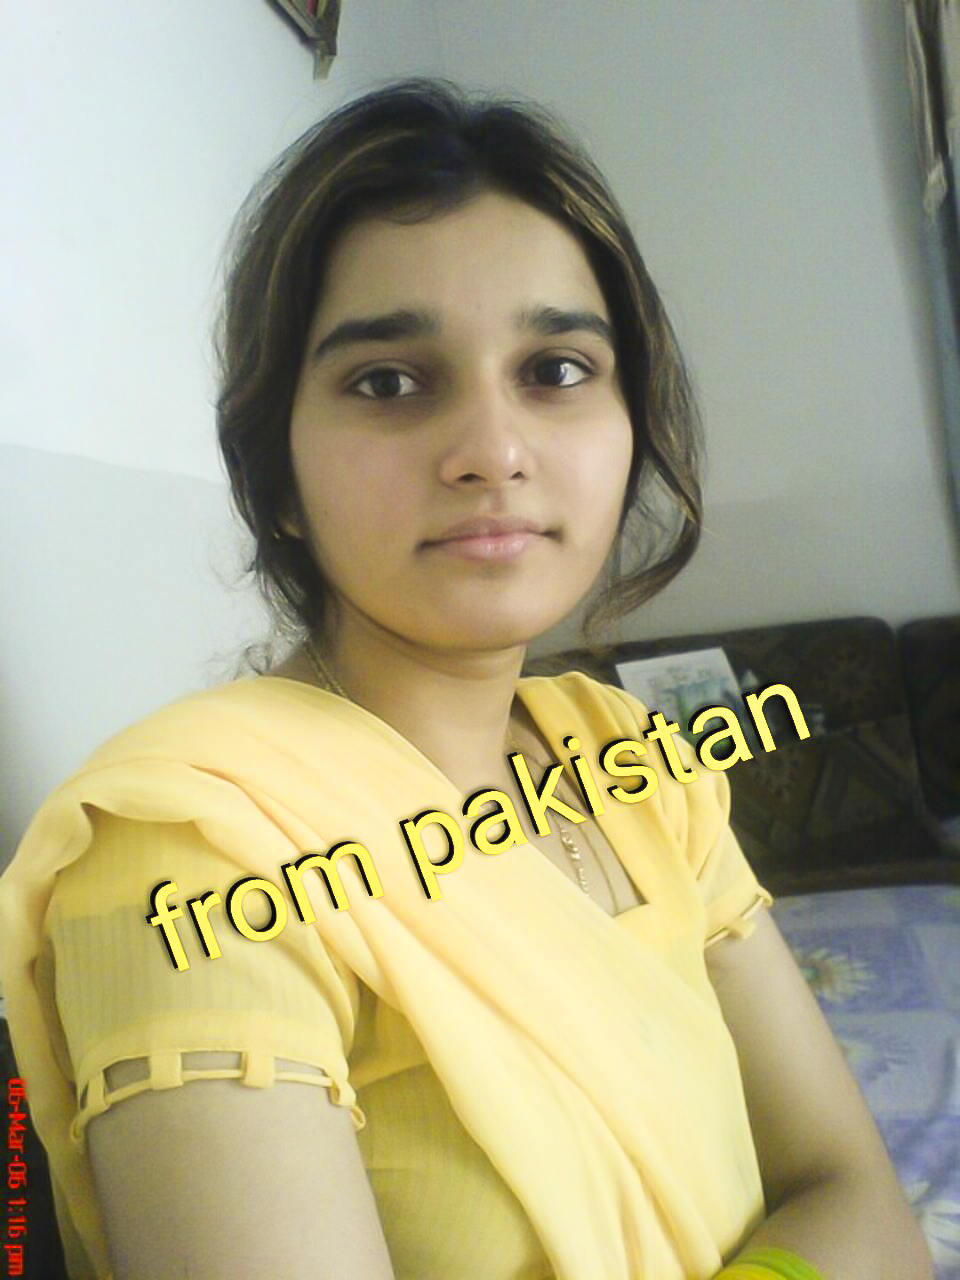 Massage In Bur Dubai 0522979563 Girl Come From Pakistan 200 Aed Hr For Massage And Sex